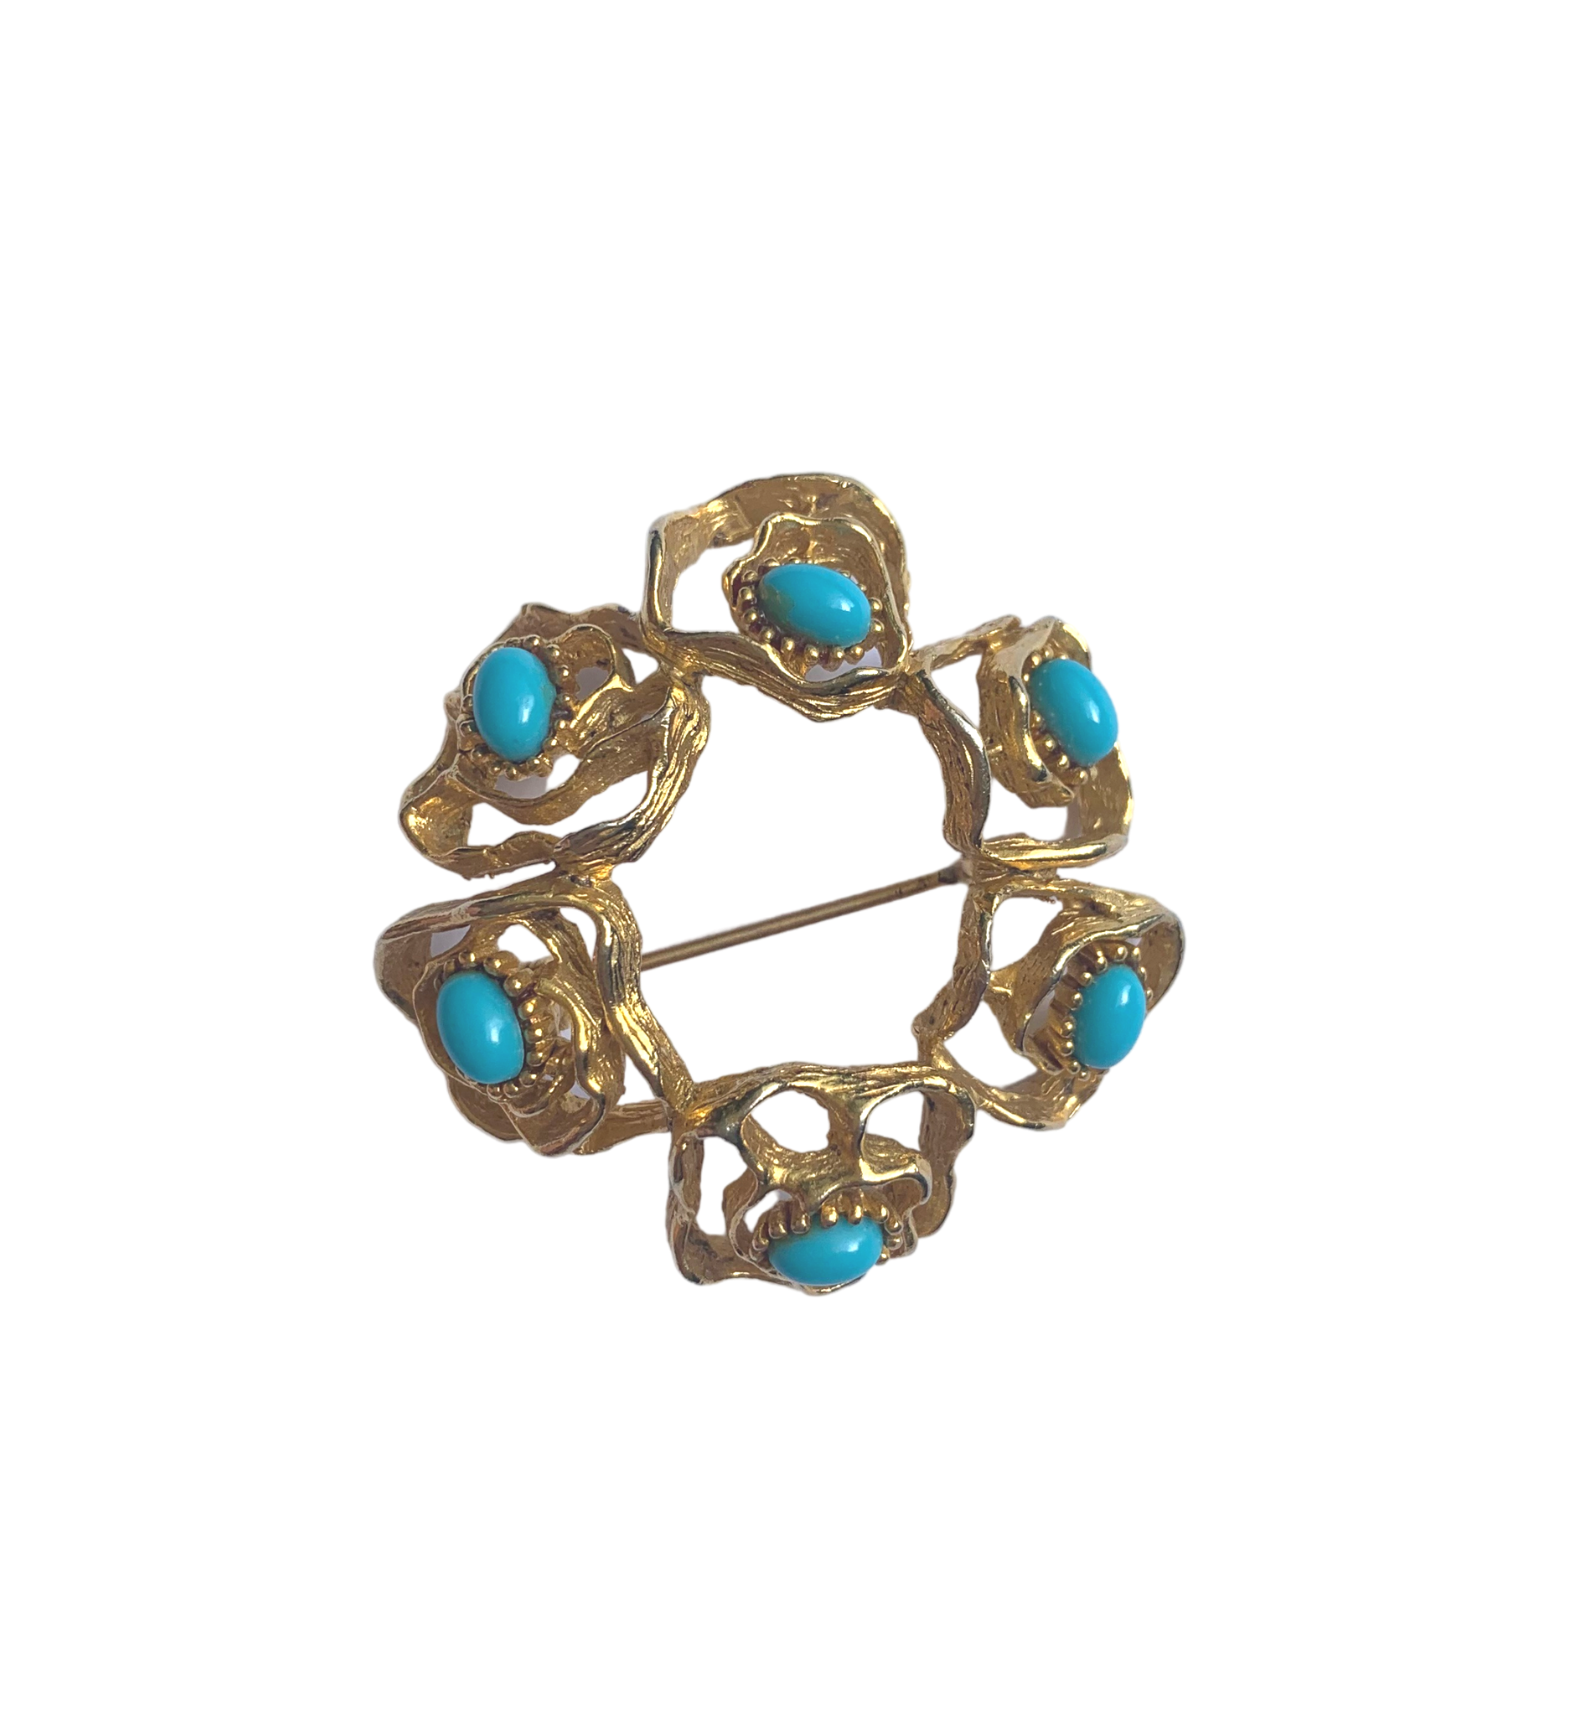 Vintage Floral Turquoise Bead & Gold Tone Brooch